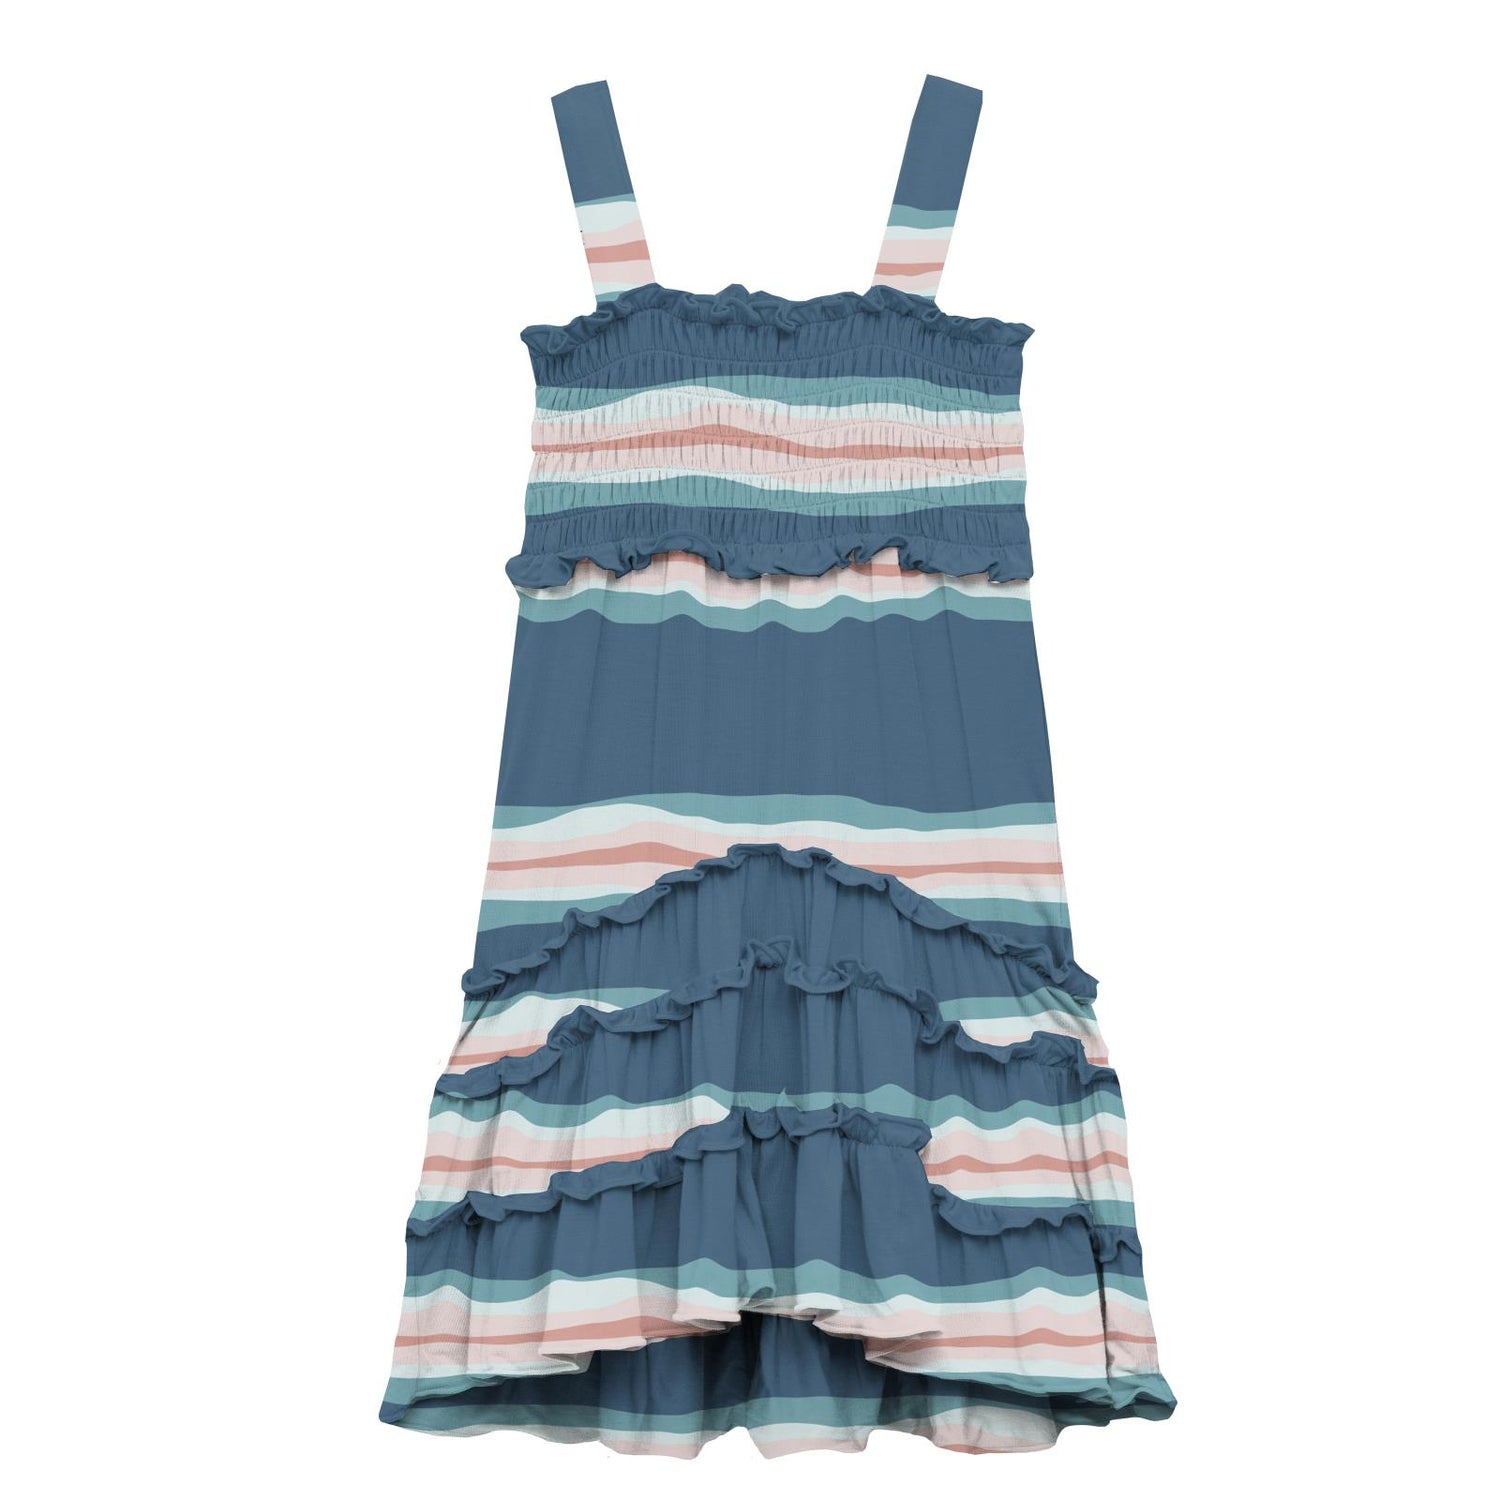 Print Sundress in Abstract Prismatic Spring